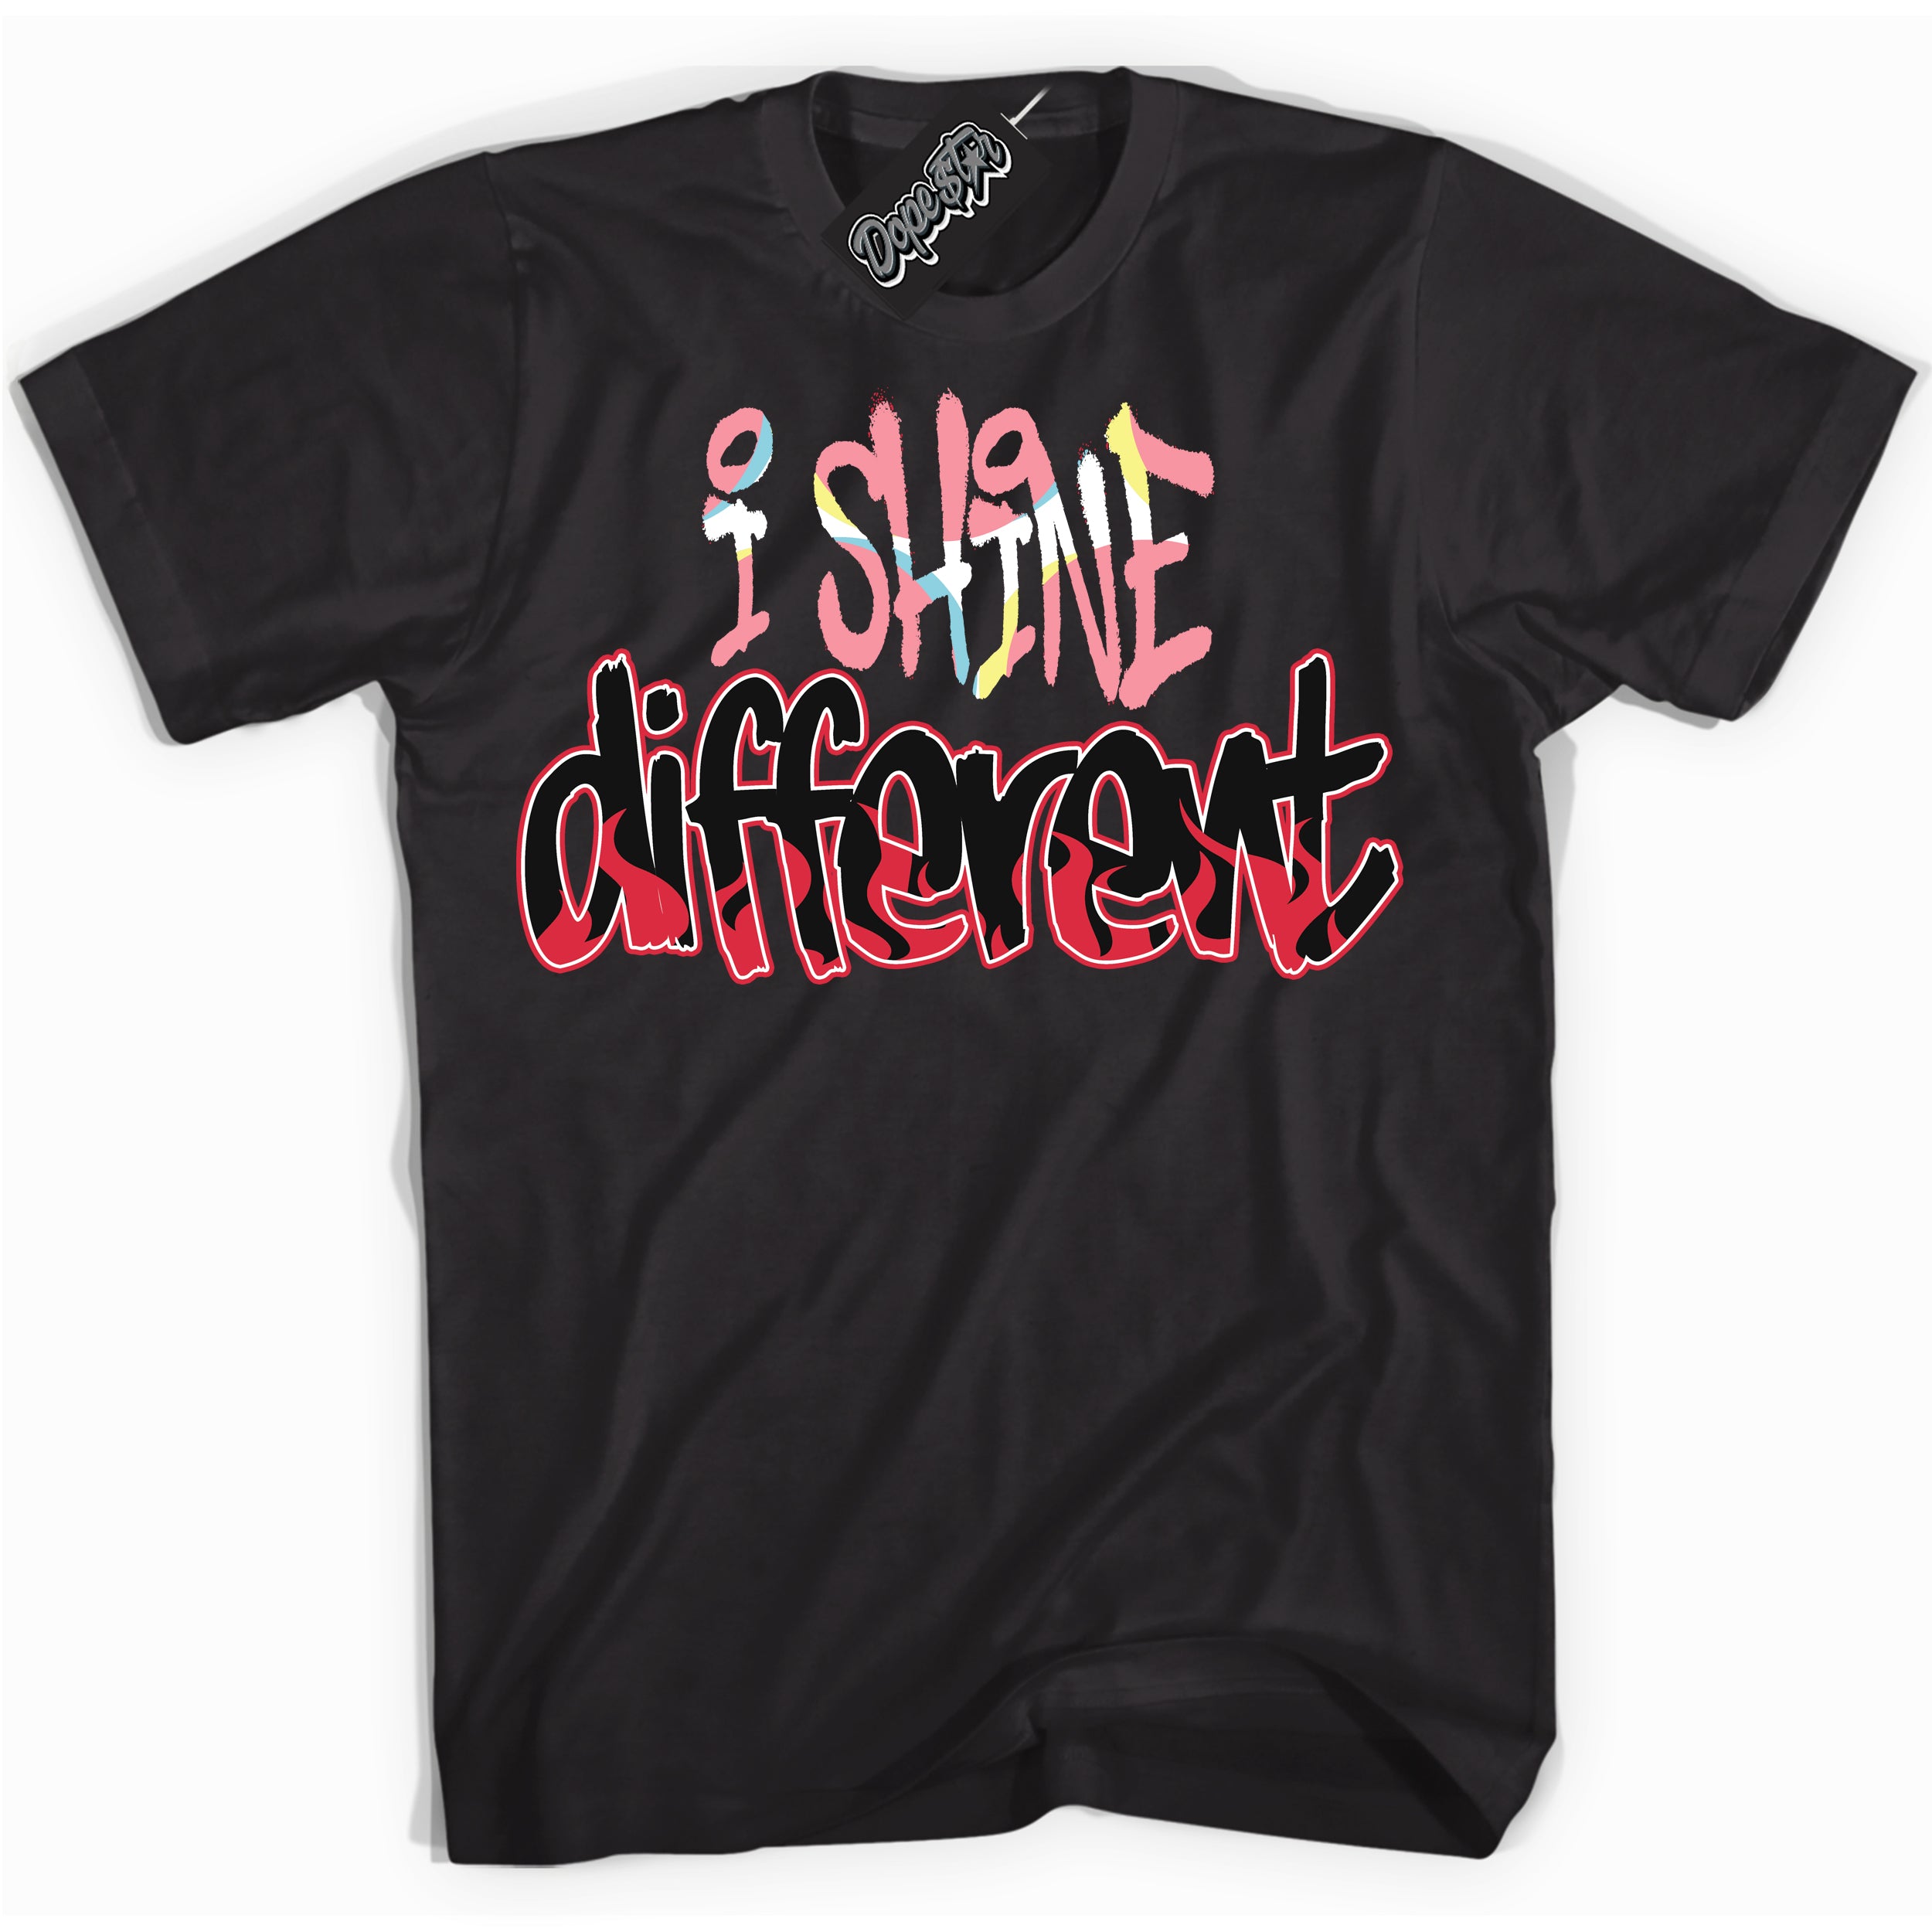 Cool Black graphic tee with “ I Shine Different ” design, that perfectly matches Spider-Verse 1s sneakers 